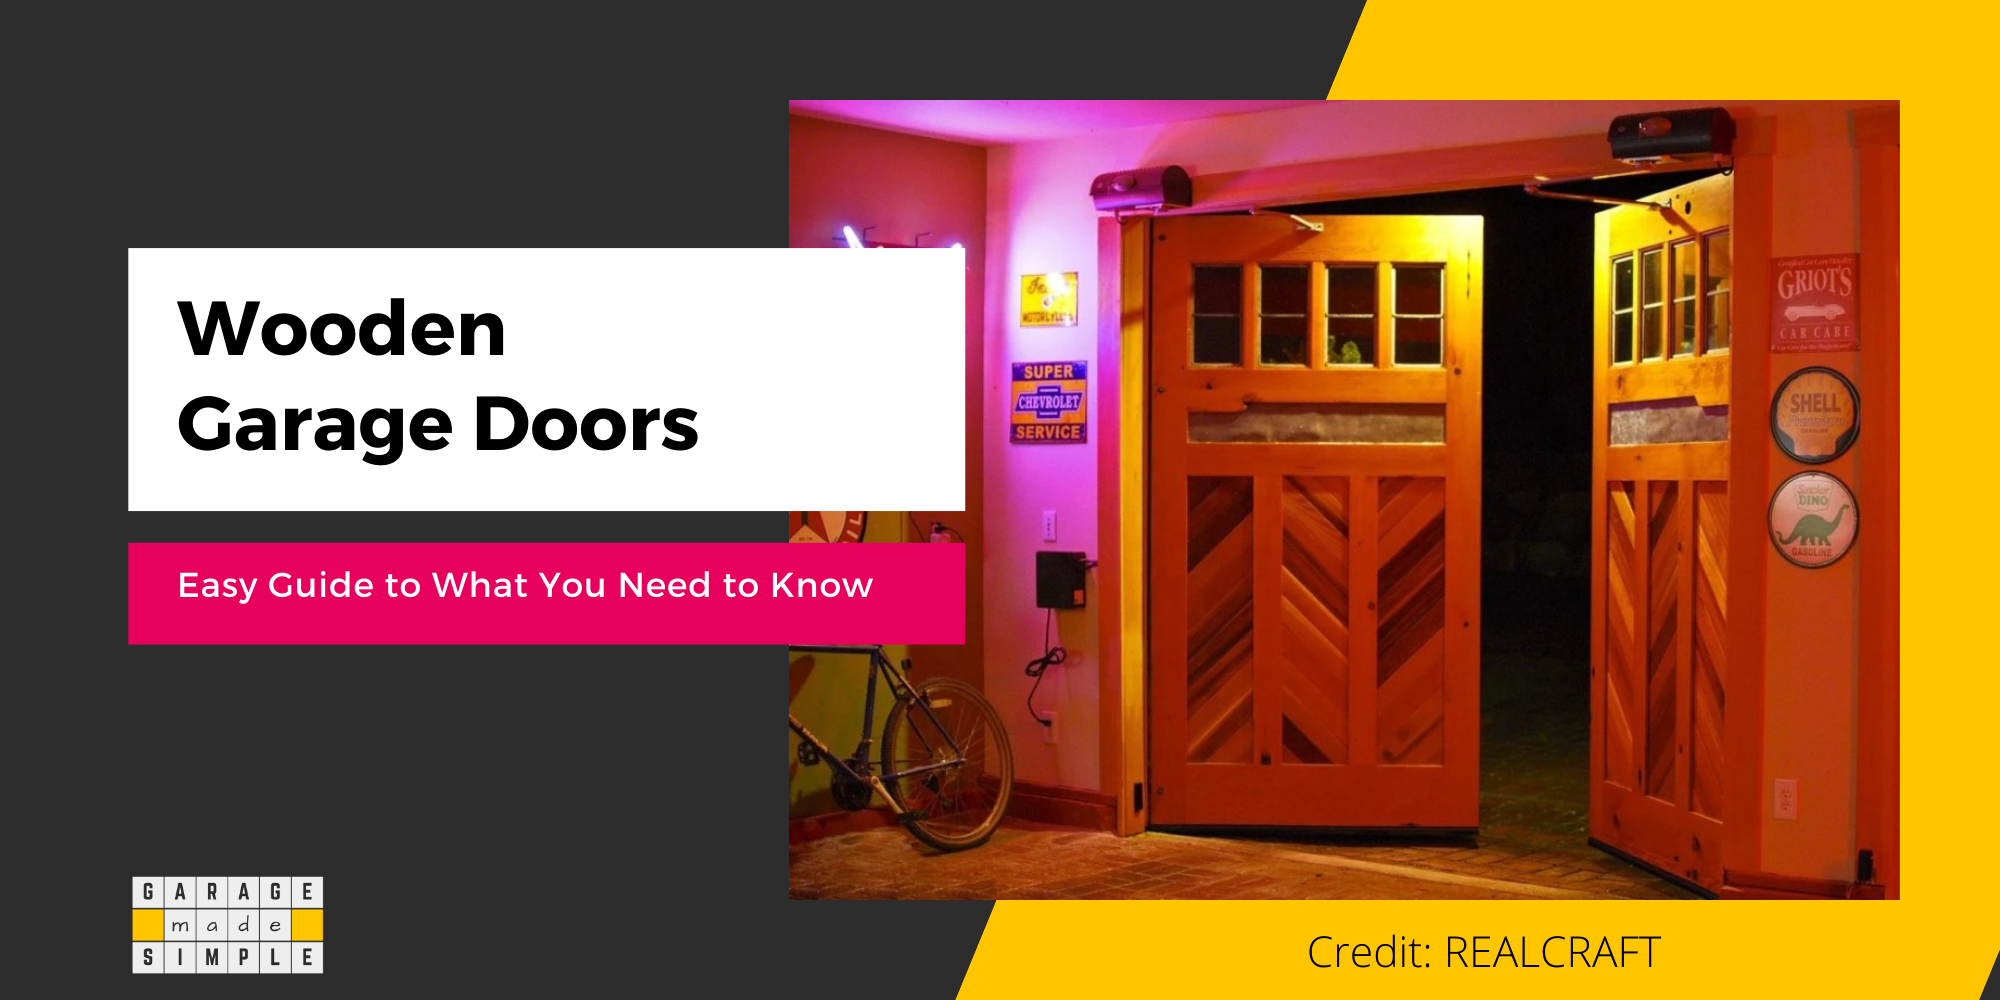 An Easy Guide To What You Need To Know About Wooden Garage Doors